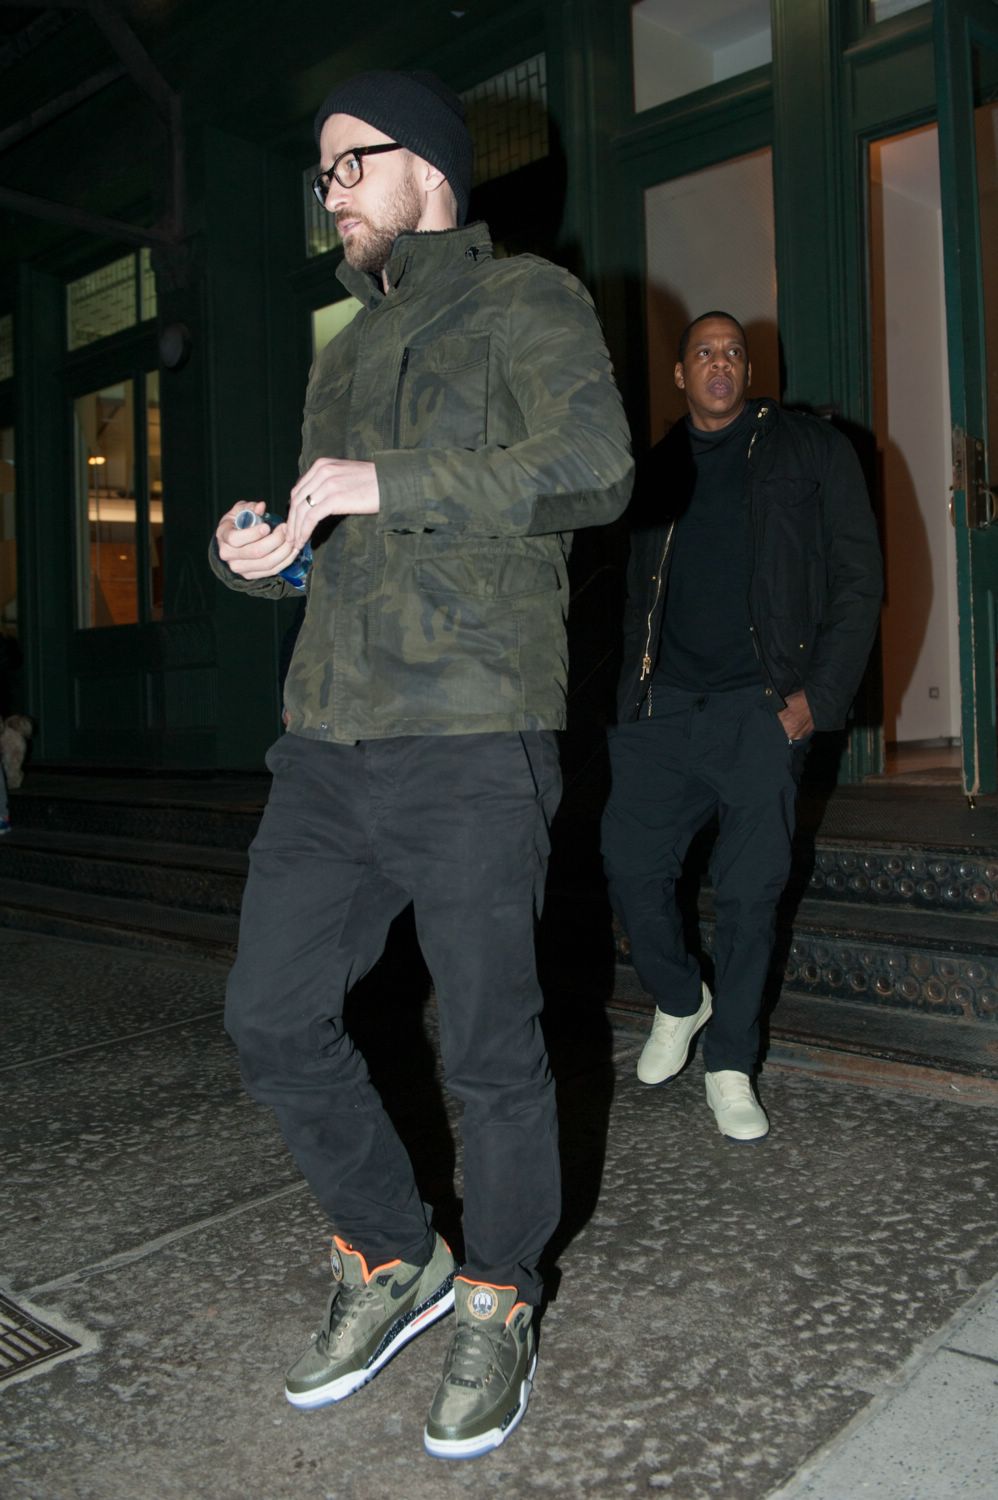 Justin Timberlake and Jay-Z are seen leaving Taylor Swift’s apartment building in New York City, 15 December 2014.